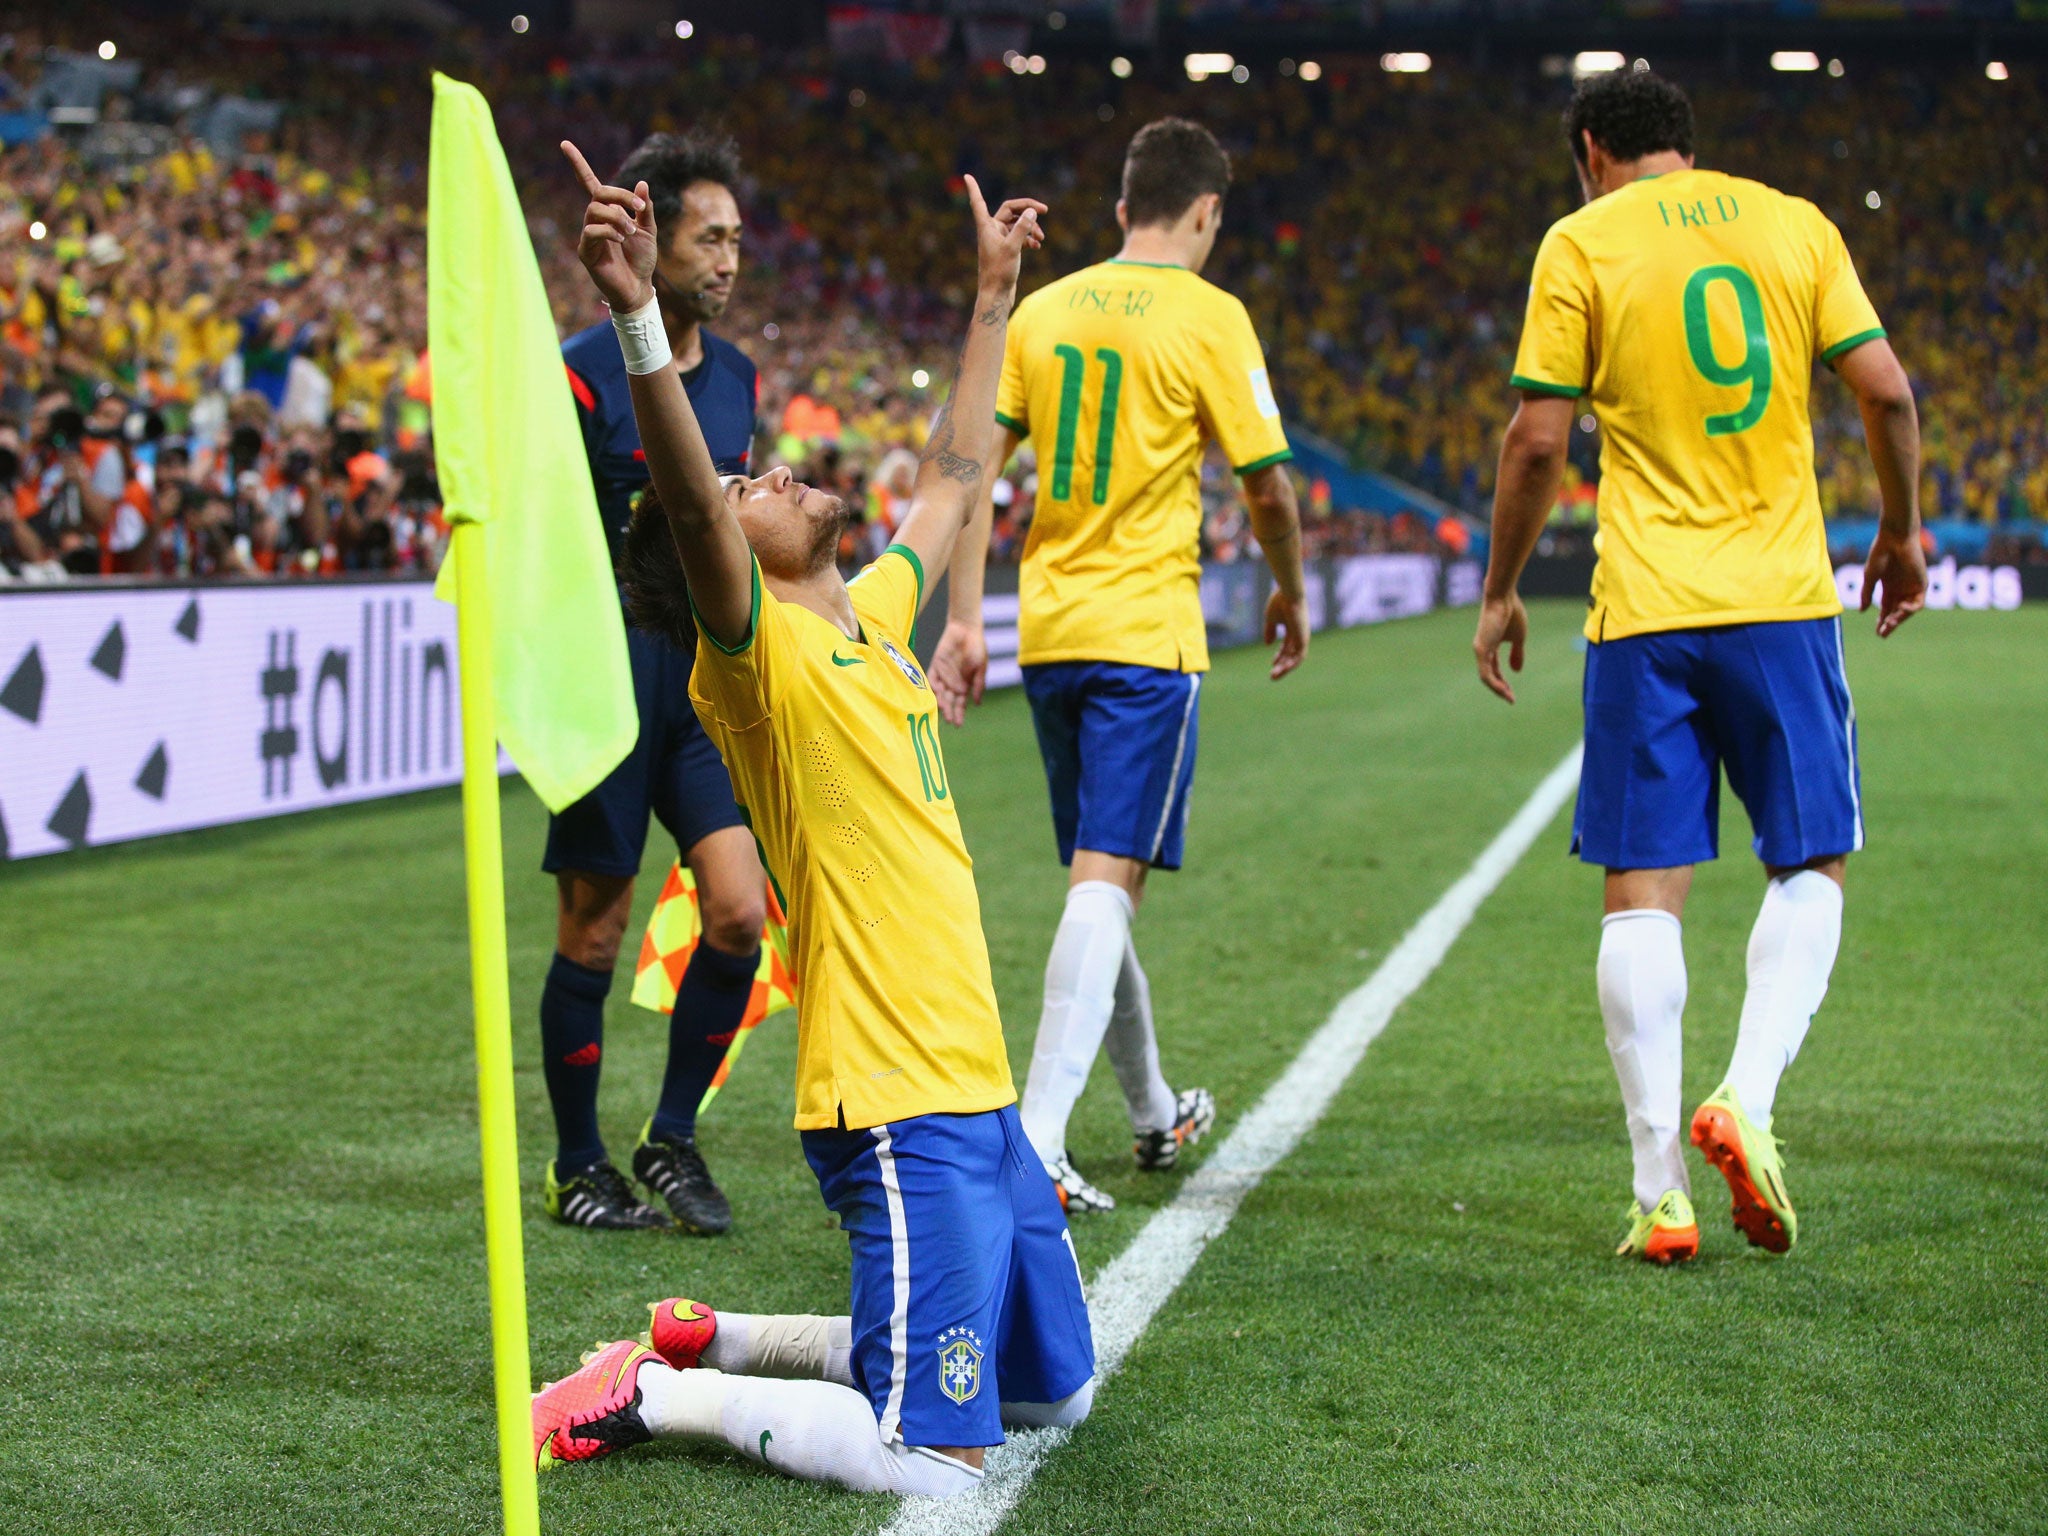 The Worst Brazil Squad Ever: The 2014 World Cup Squad - World Soccer Talk